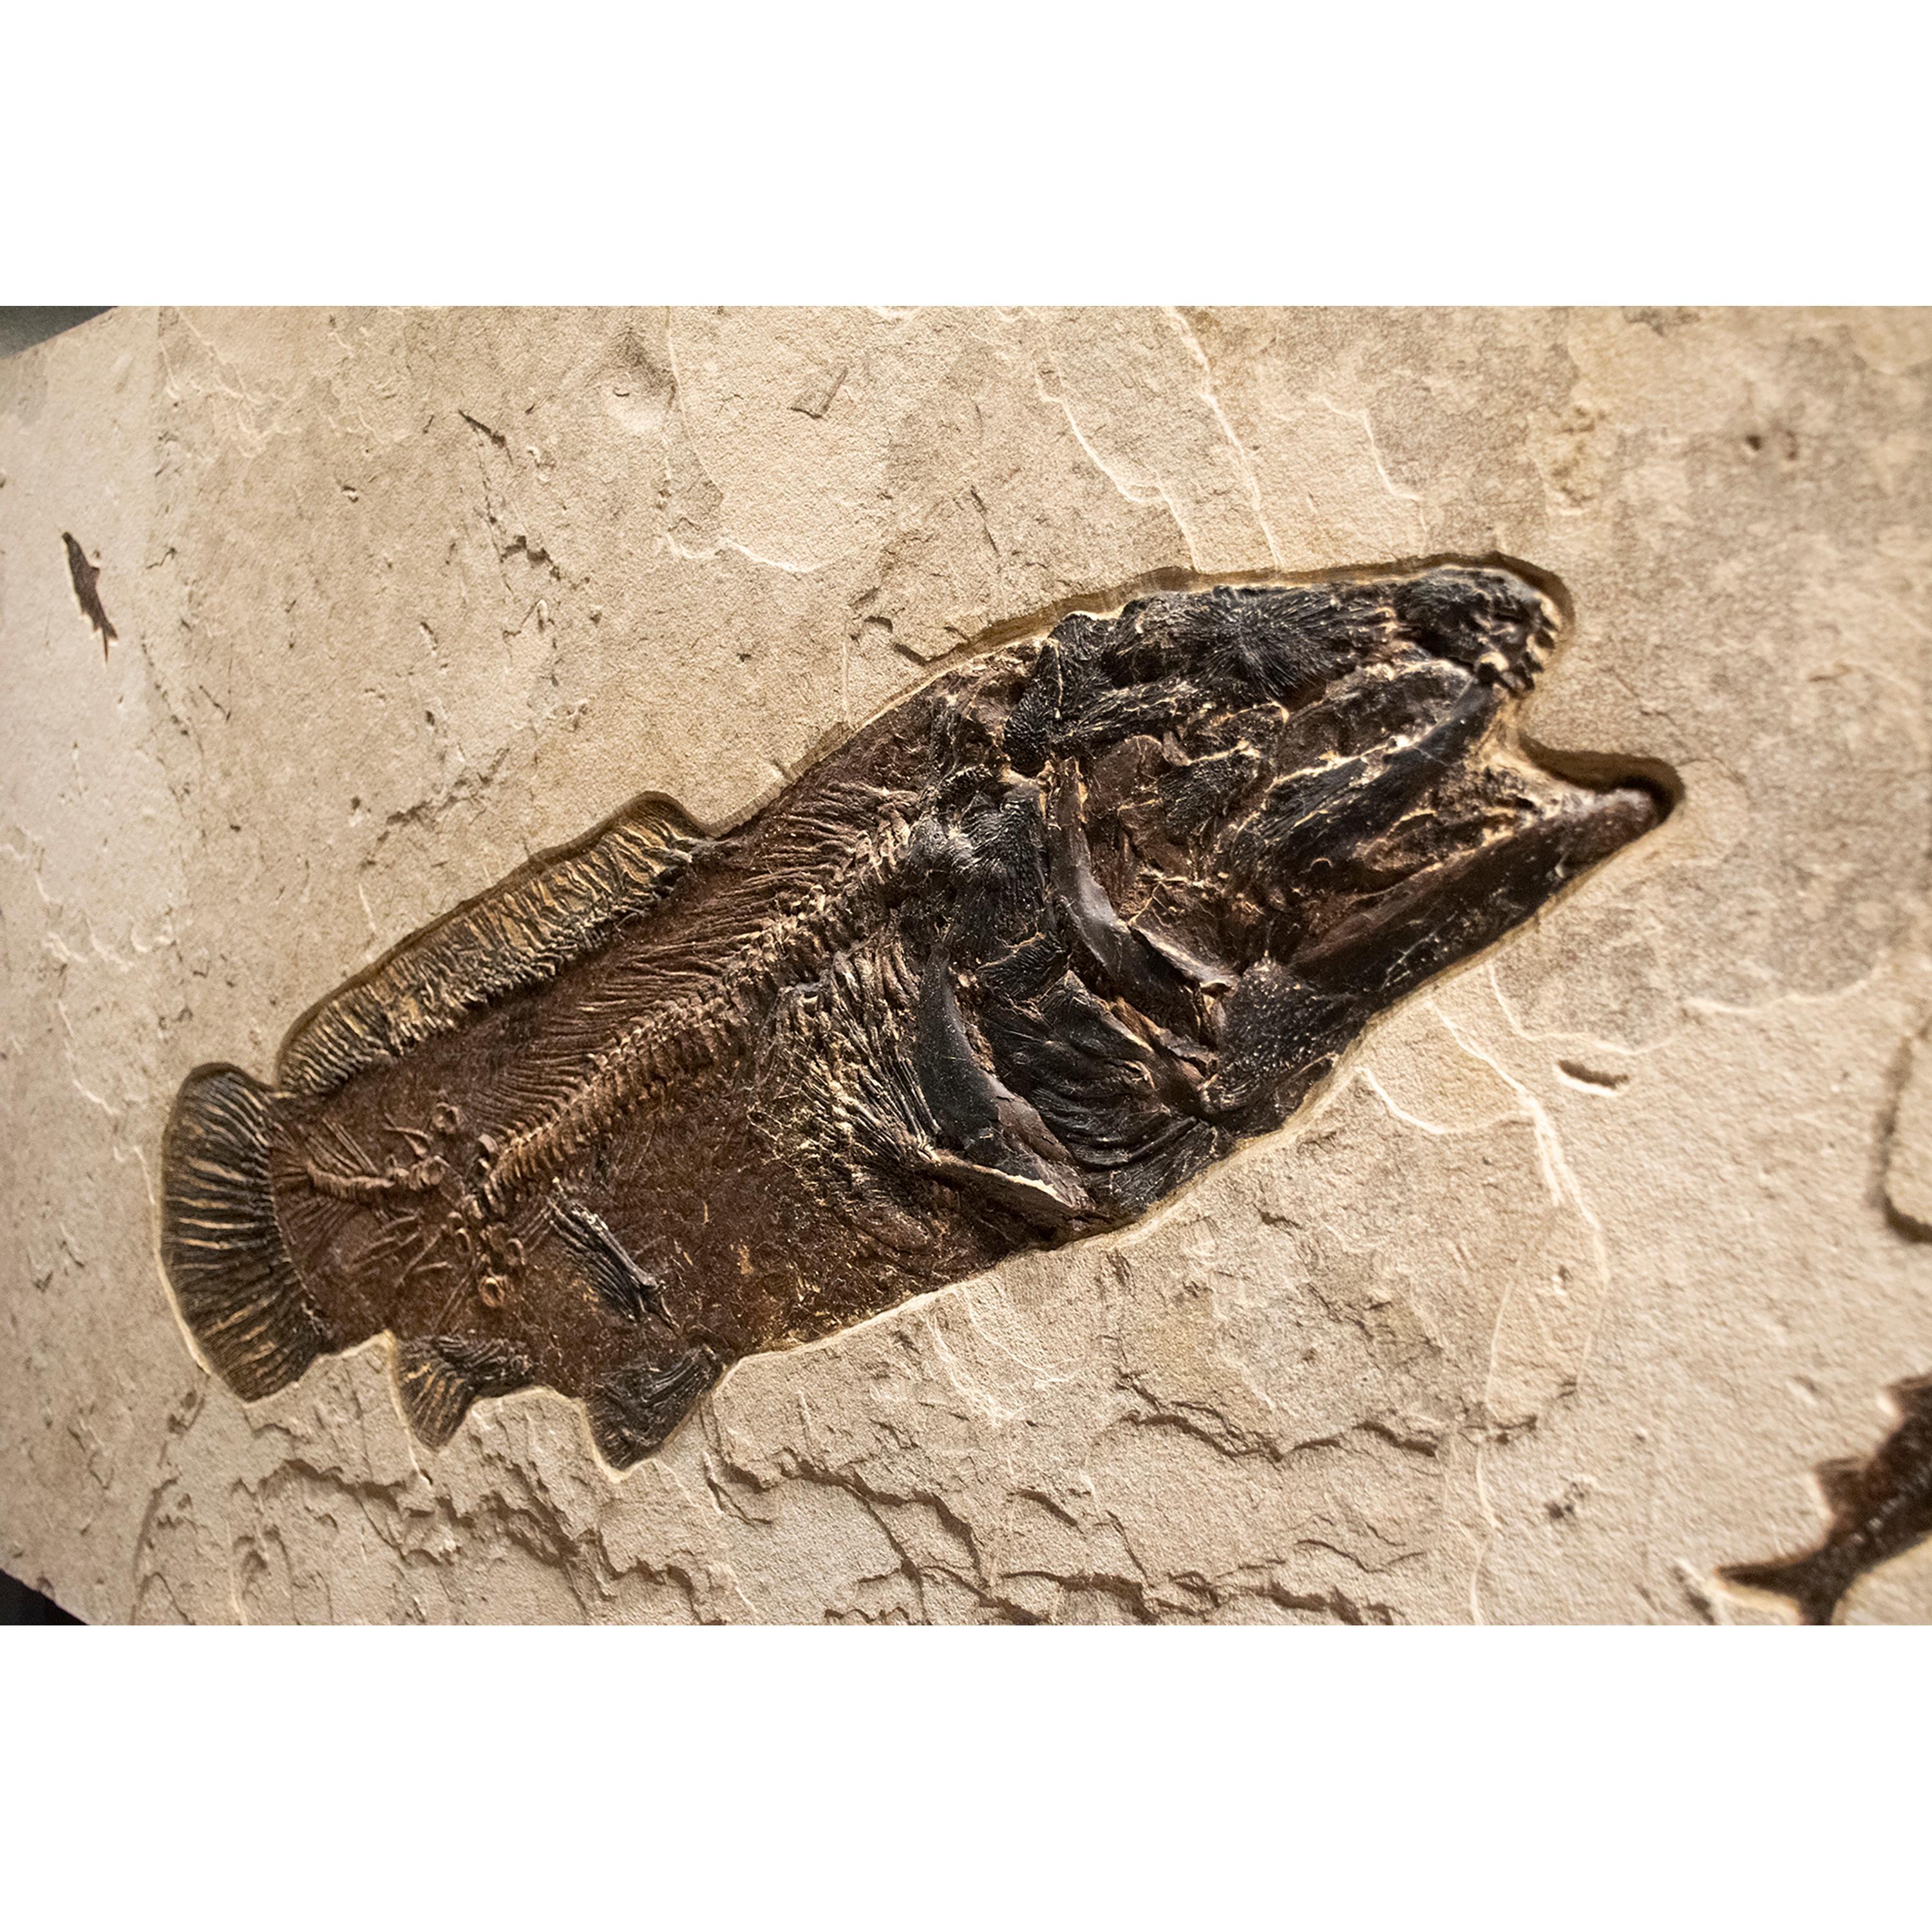 American 50 Million Year Old Fossil Fish Amia, Bowfin, Mural in Stone, from Wyoming